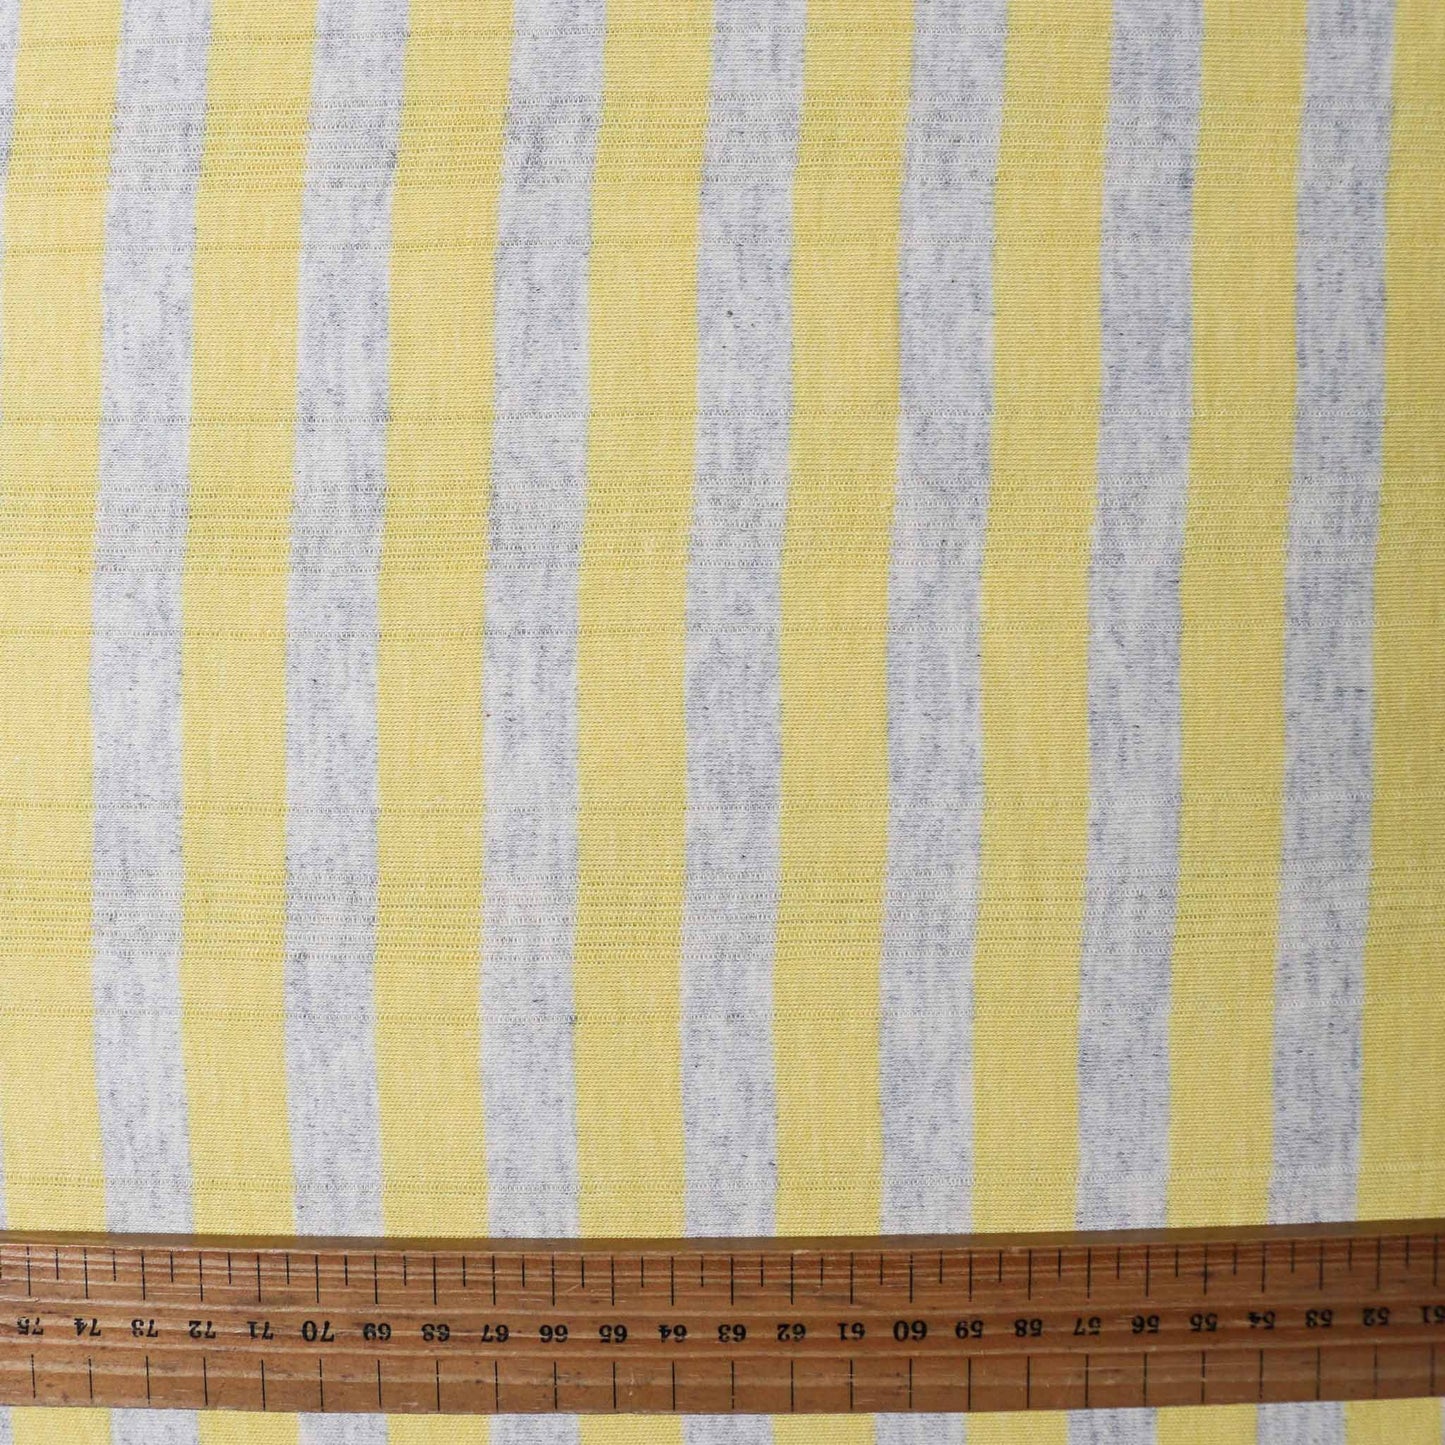 yellow grey striped polycotton jersey fabric for dressmaking from cloth control